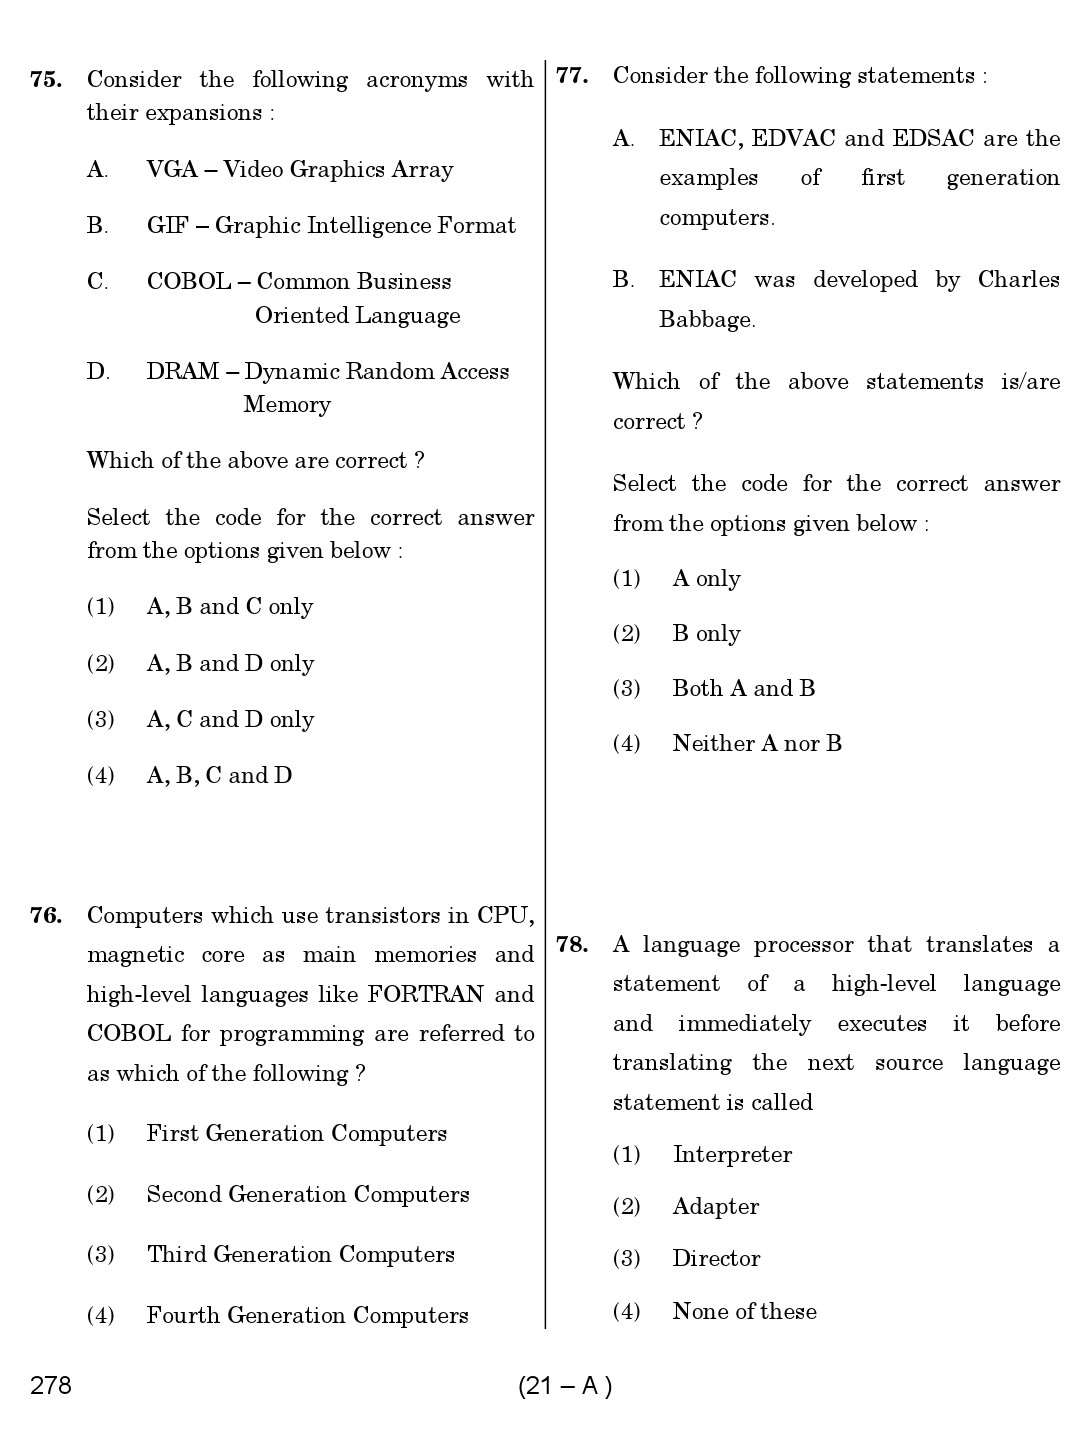 Karnataka PSC First Division Computer Assistants Exam Sample Question Paper 278 21